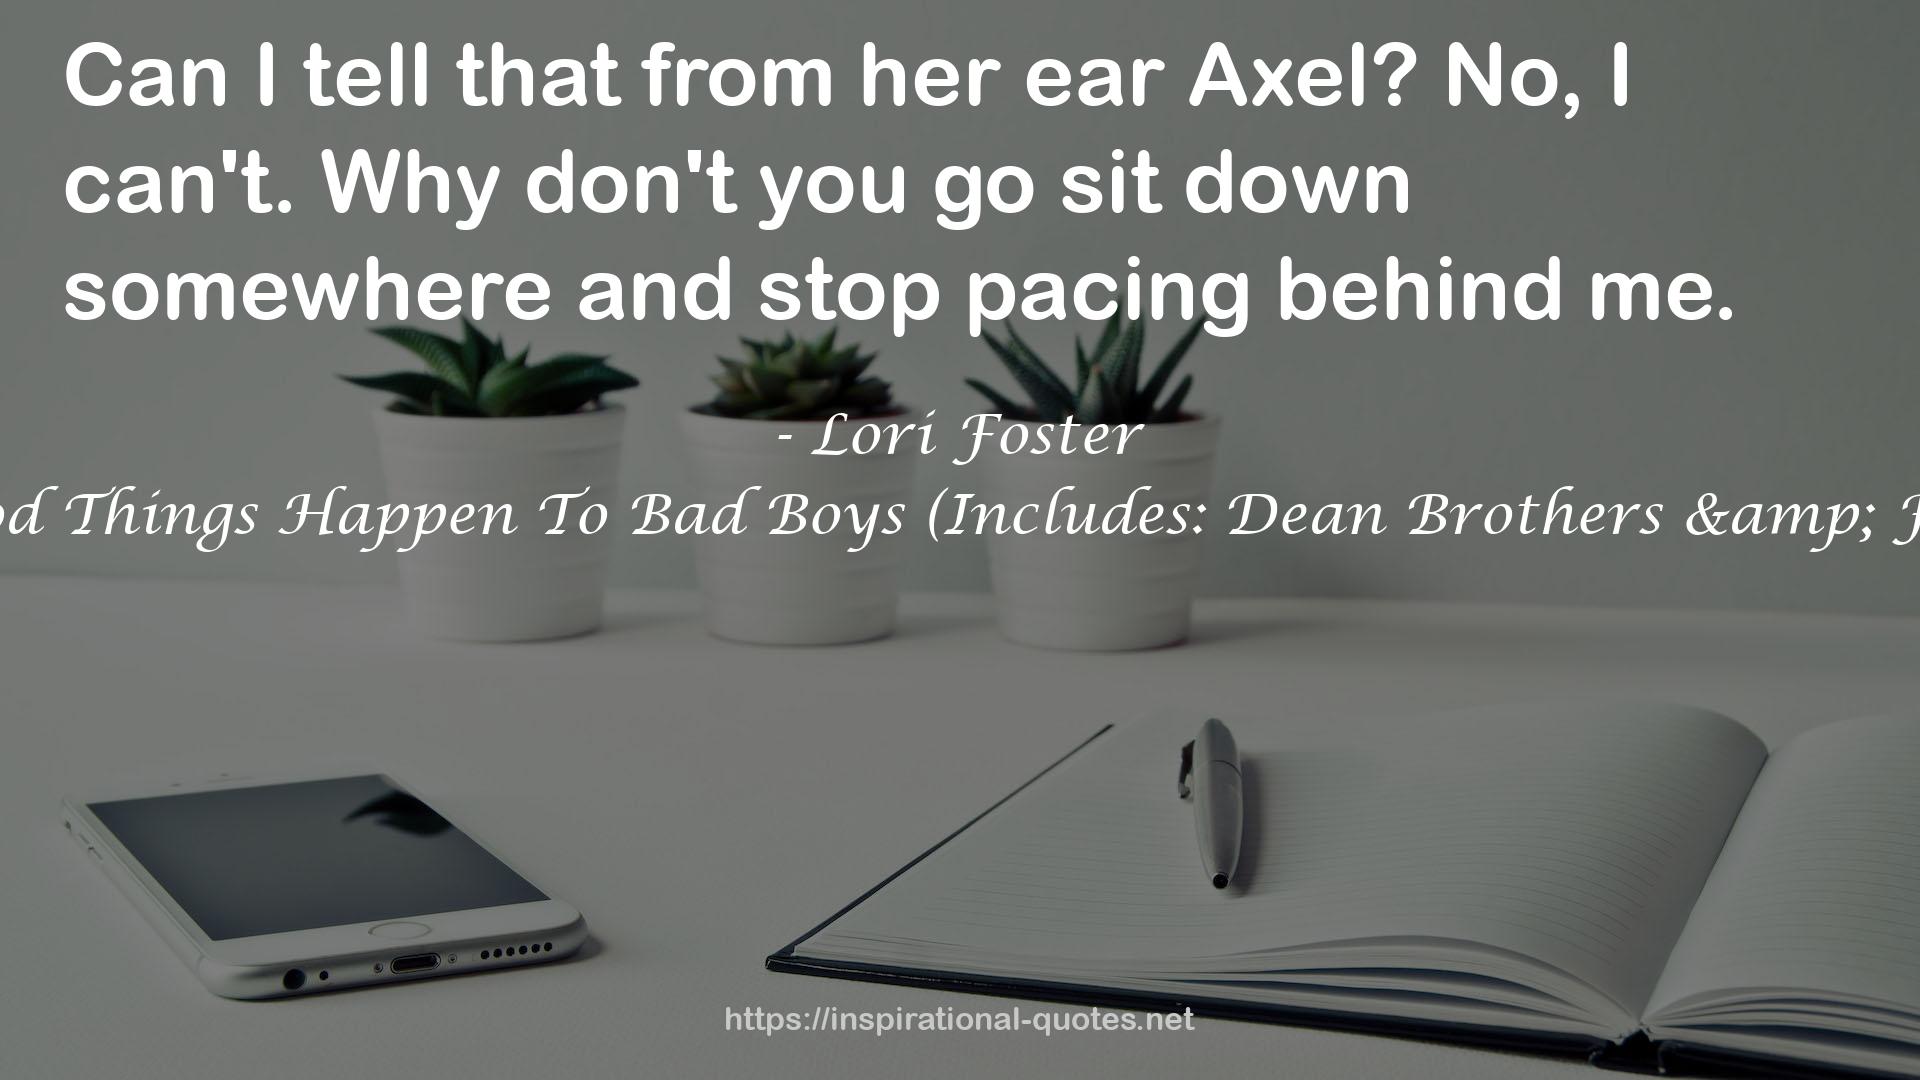 When Good Things Happen To Bad Boys (Includes: Dean Brothers & Friend, #3) QUOTES